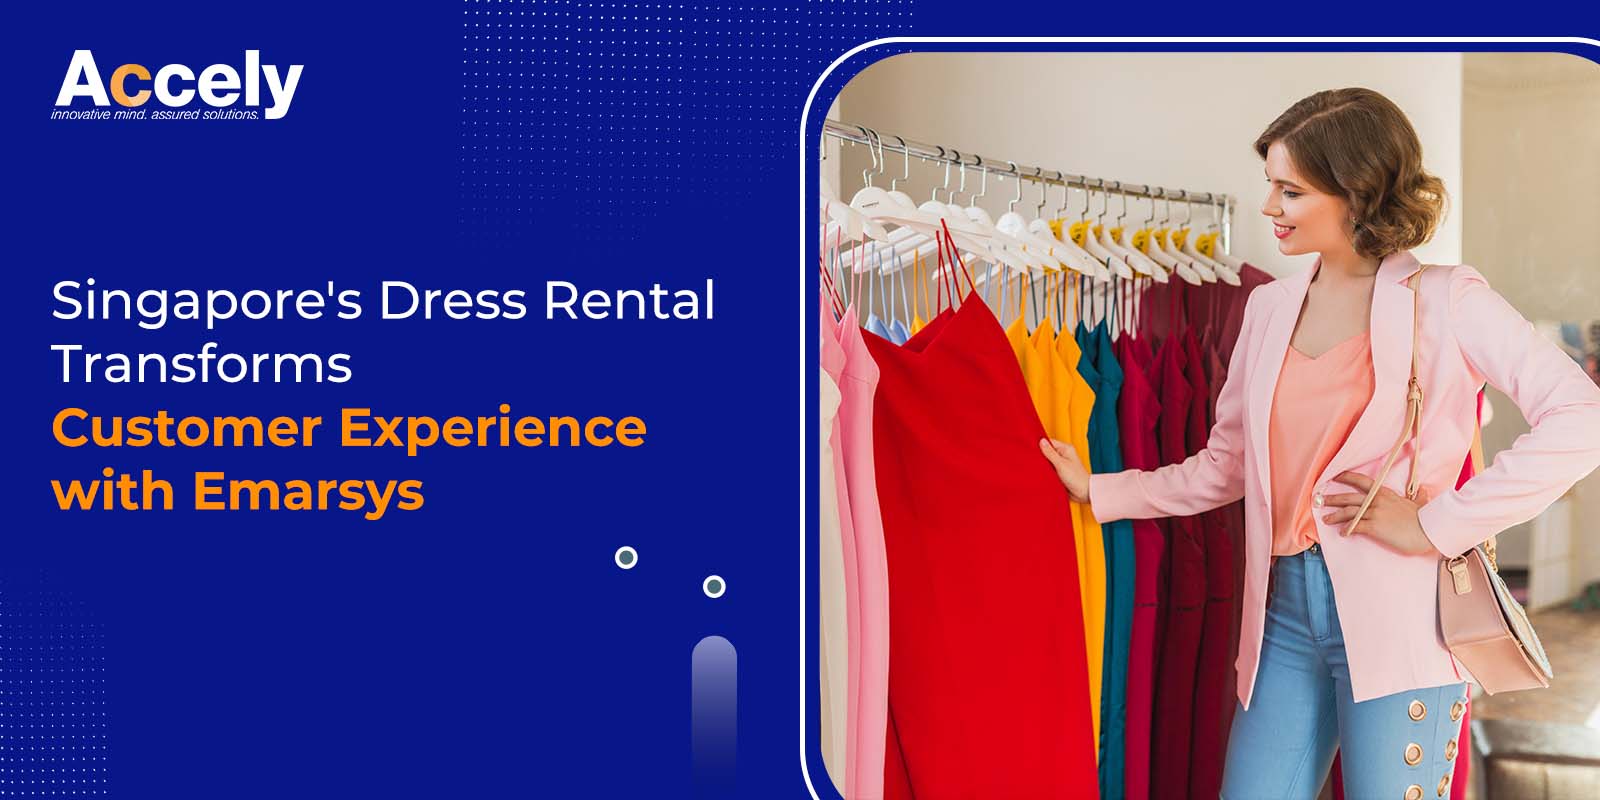 Singapore's Dress Rental Transforms Customer Experience with Emarsys